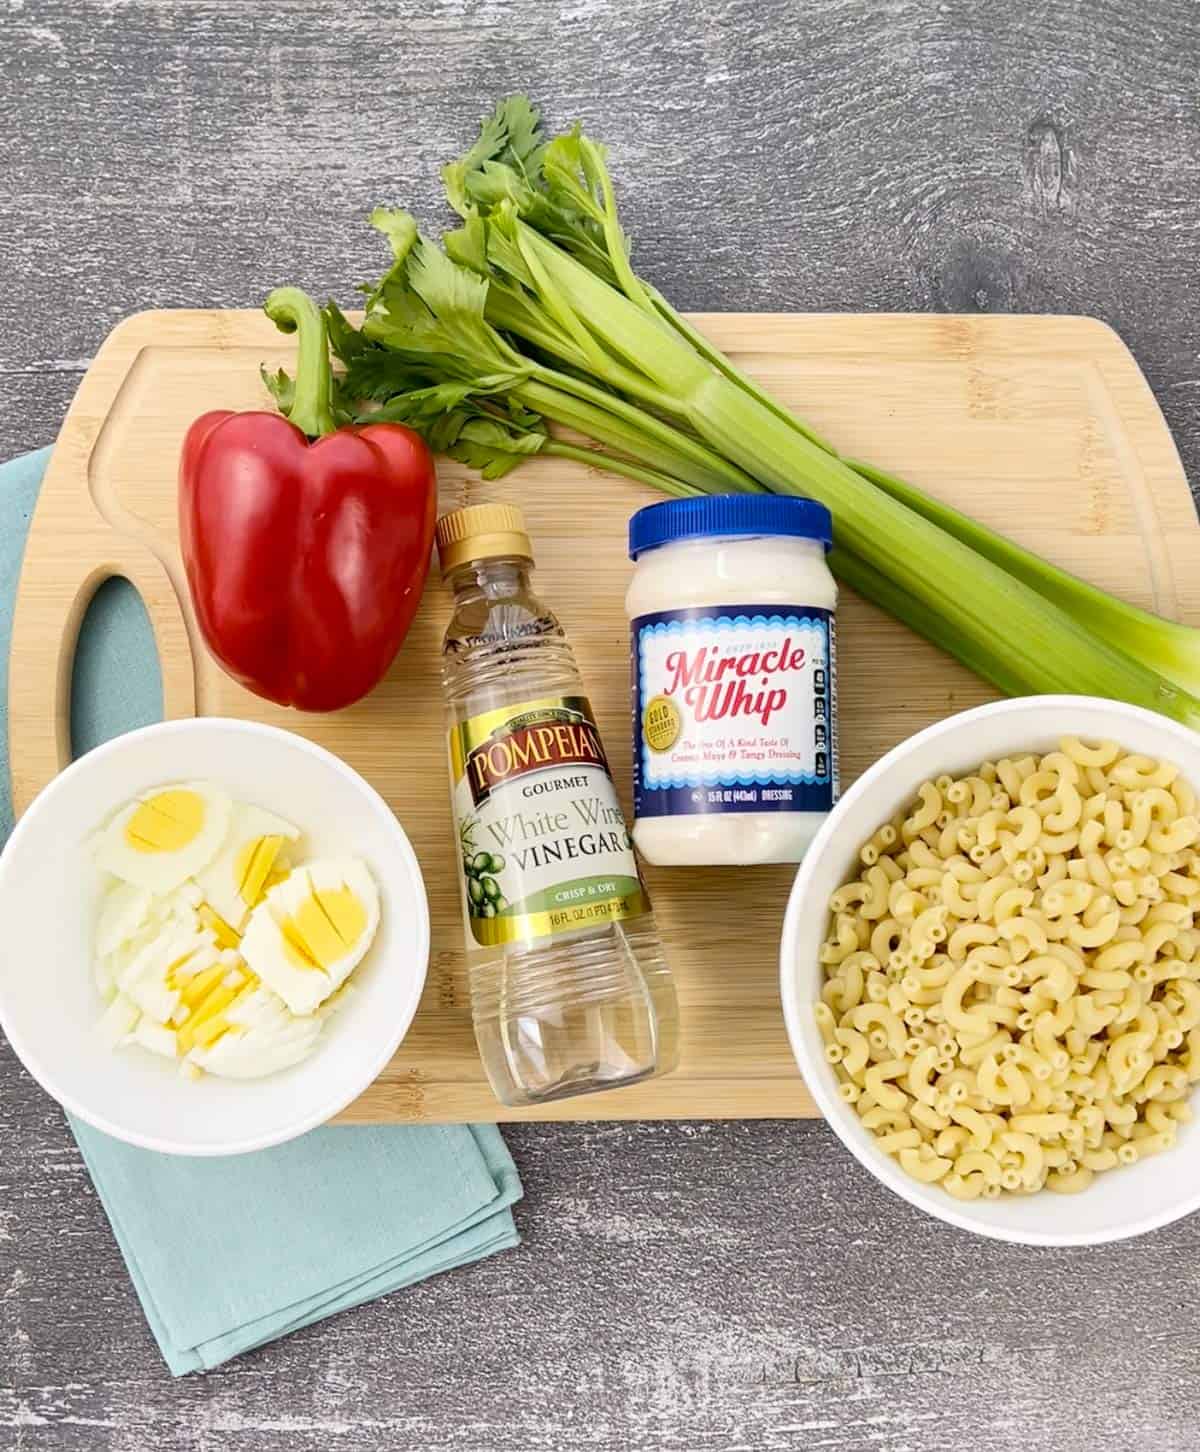 Ingredients for Amish macaroni salad on a cutting board.